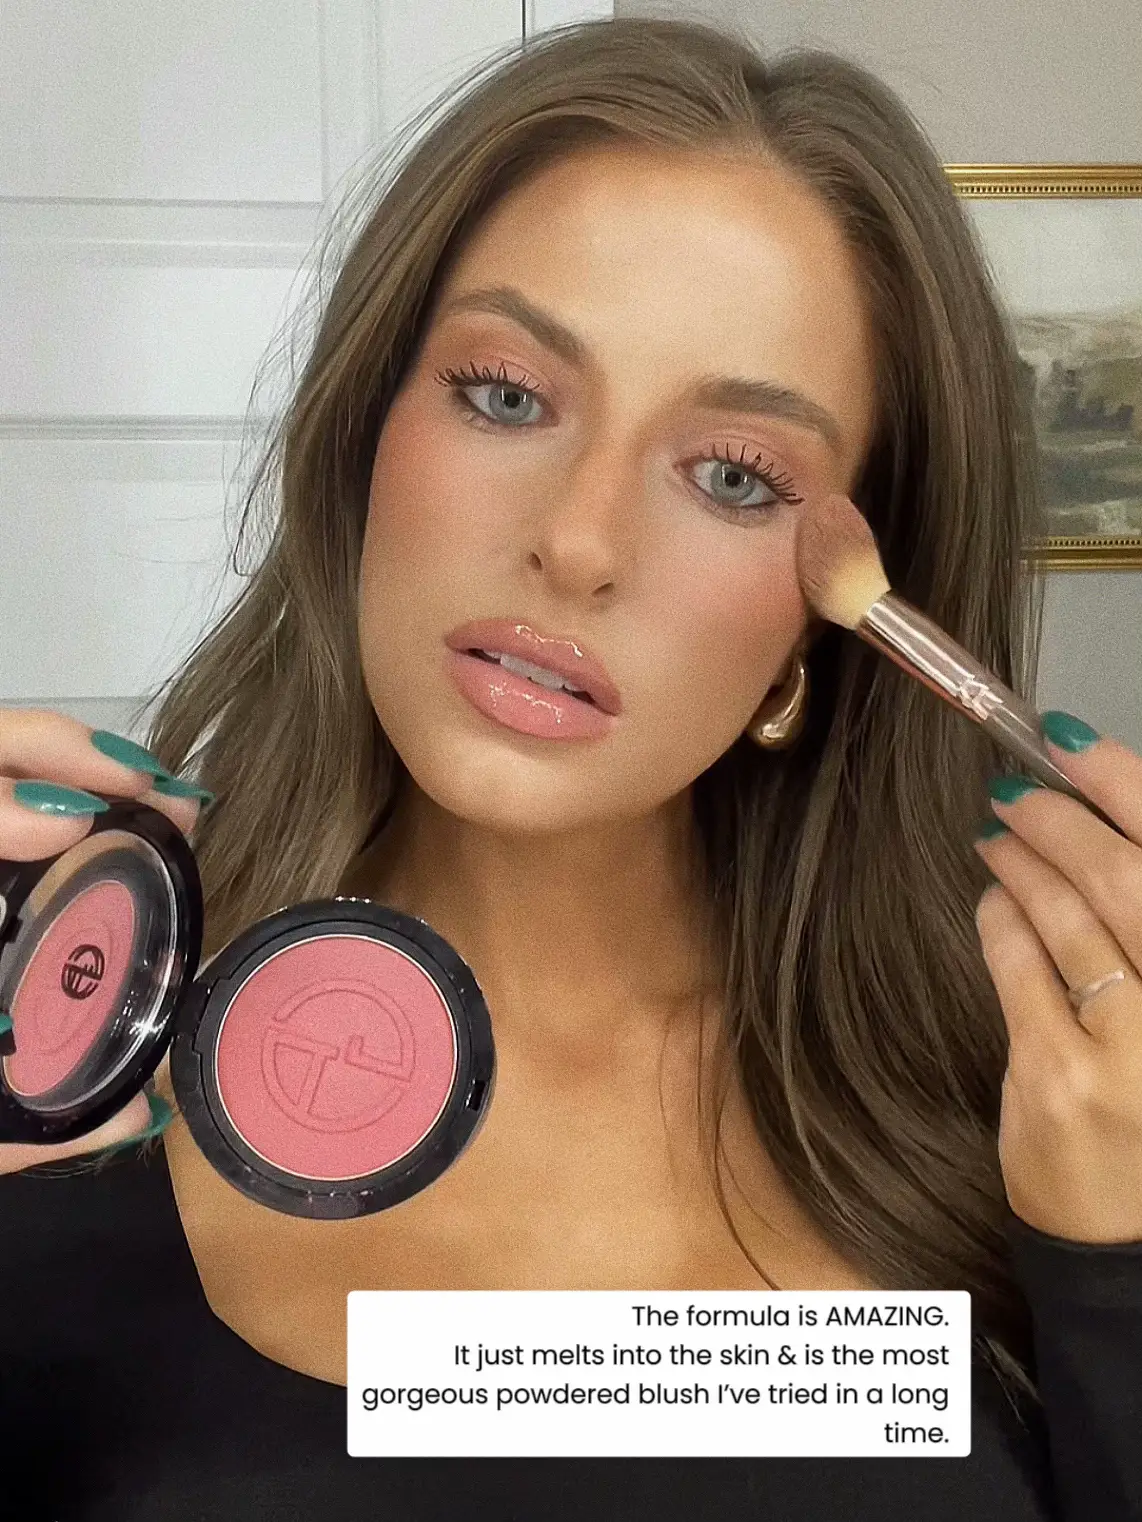  A woman is holding a pink makeup compact in her hand.